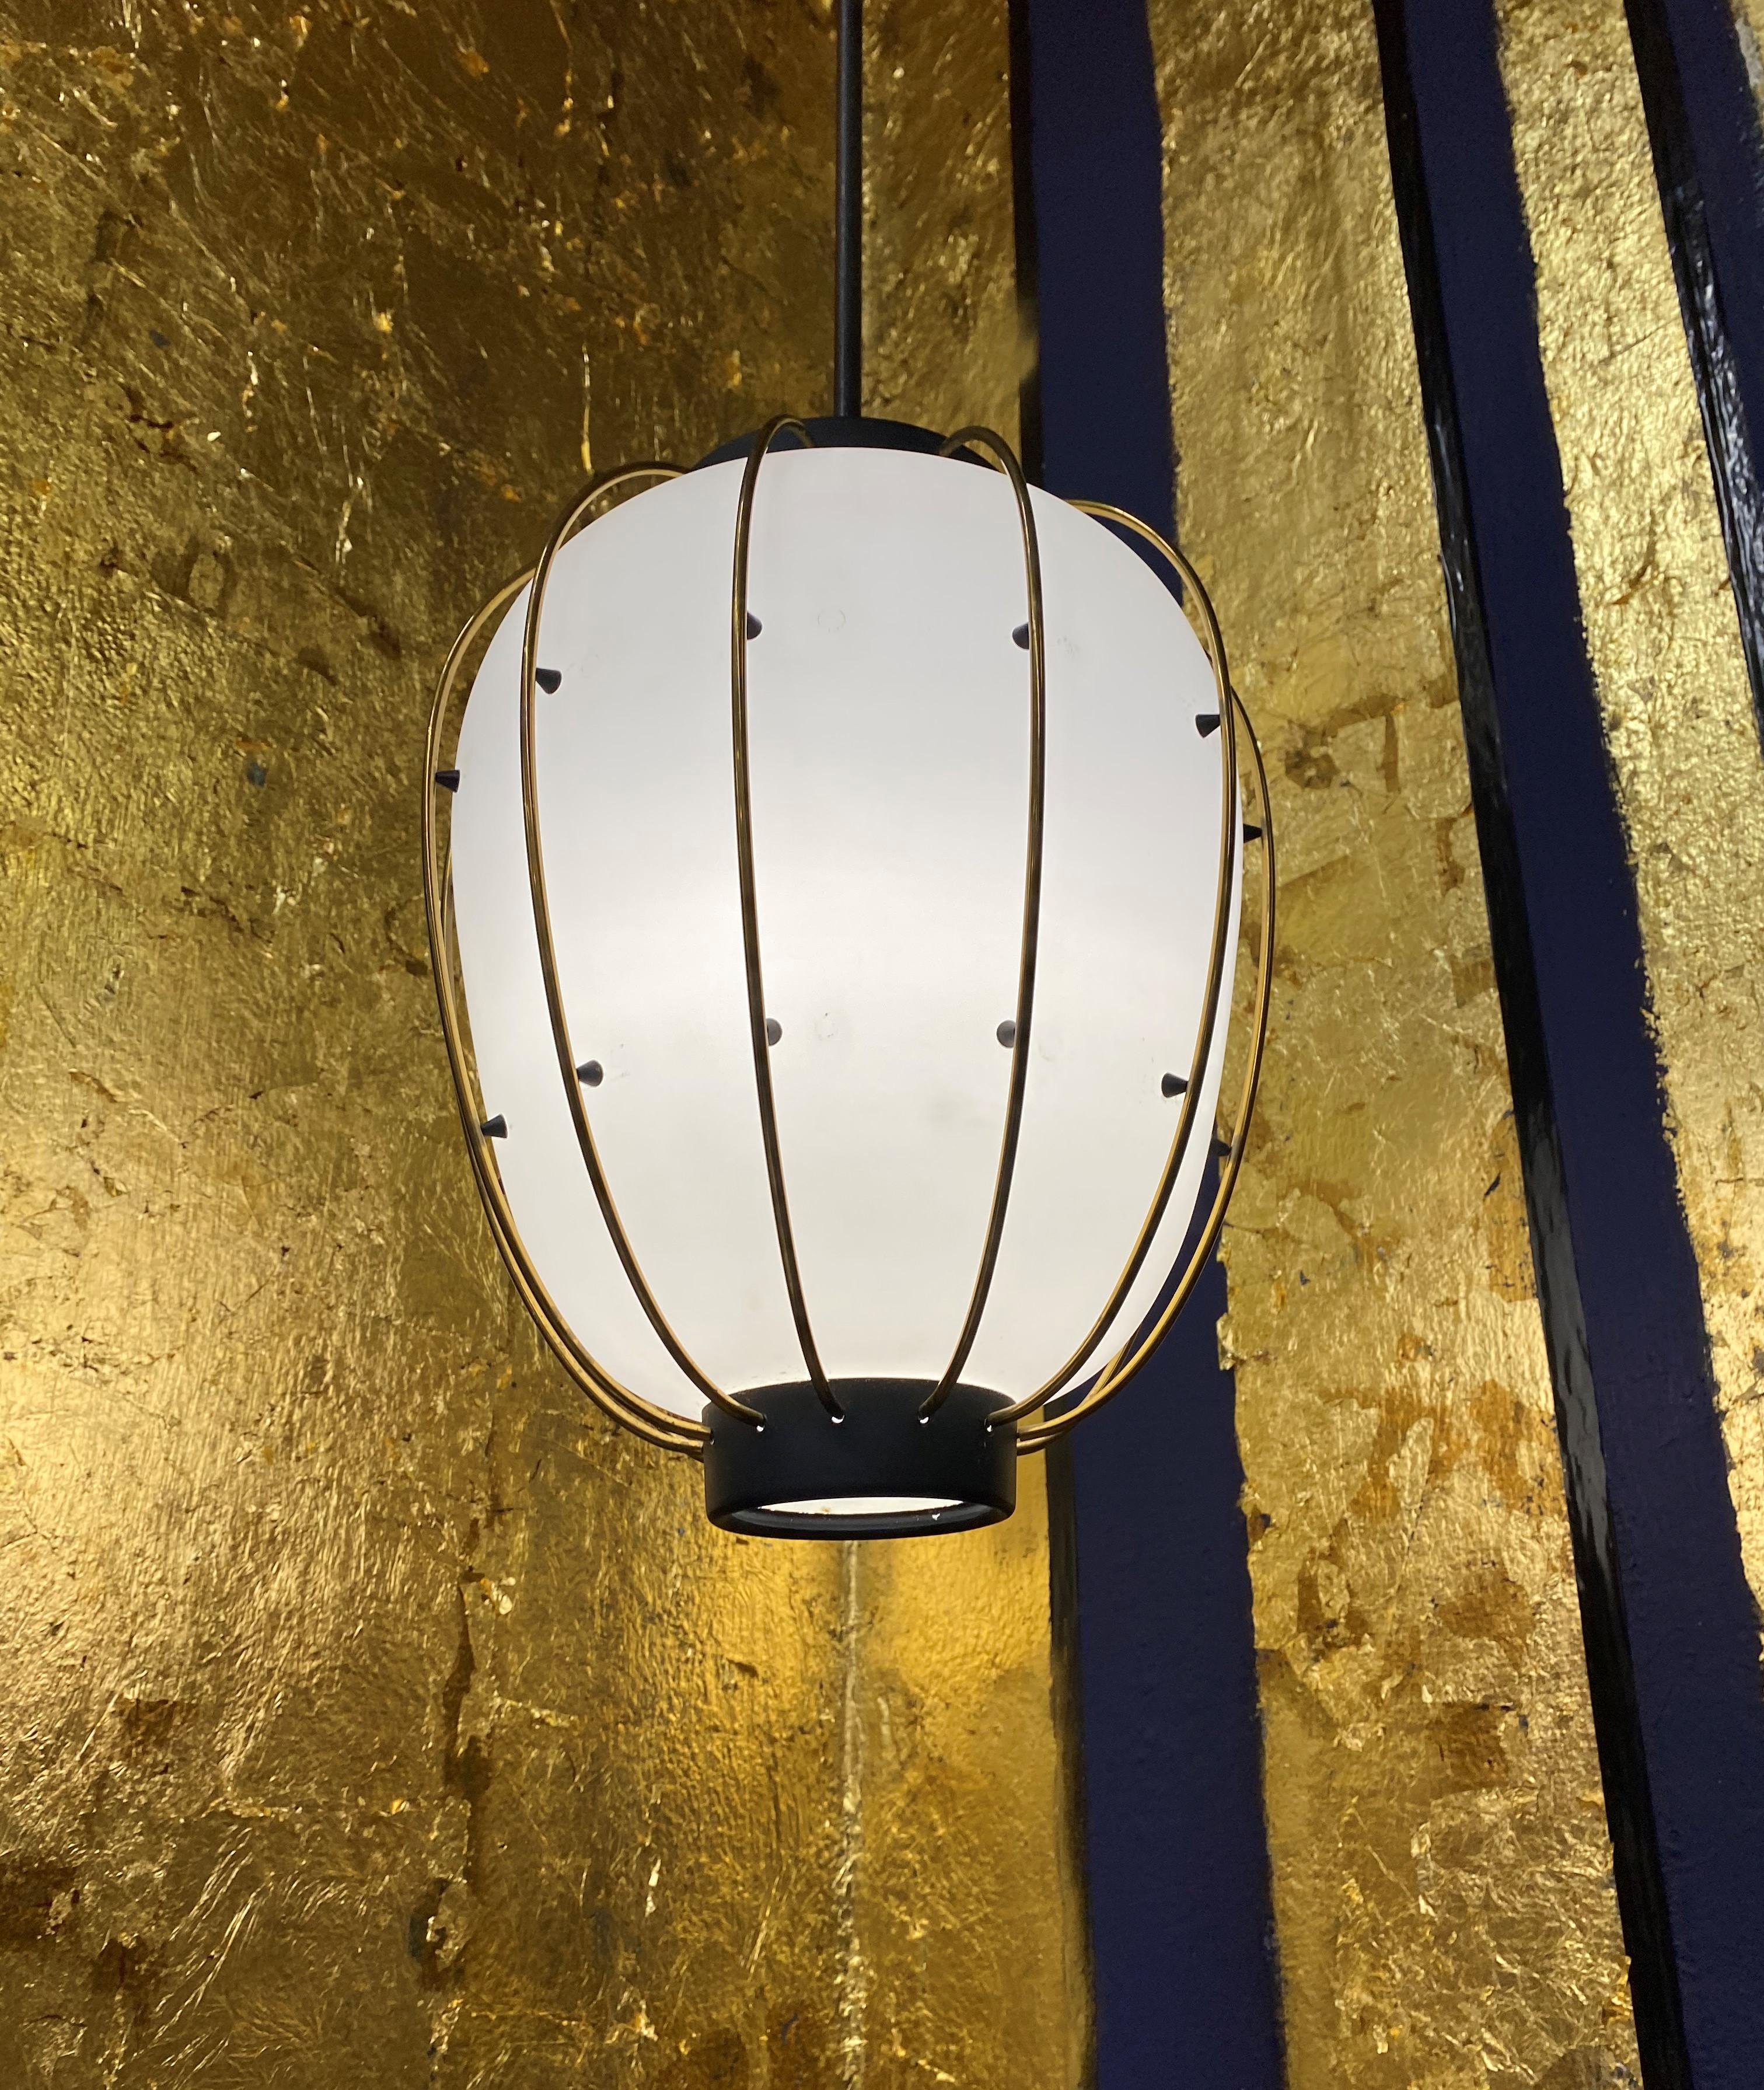 Beautiful pendant lights / Lanterns in lacquered metal, brass and opaline glass, attributed to Stilnovo and very much in the manner of Angelo Lelii's designs for Arredoluce from the same era.
We have 1 available immediately and 2 more that we have